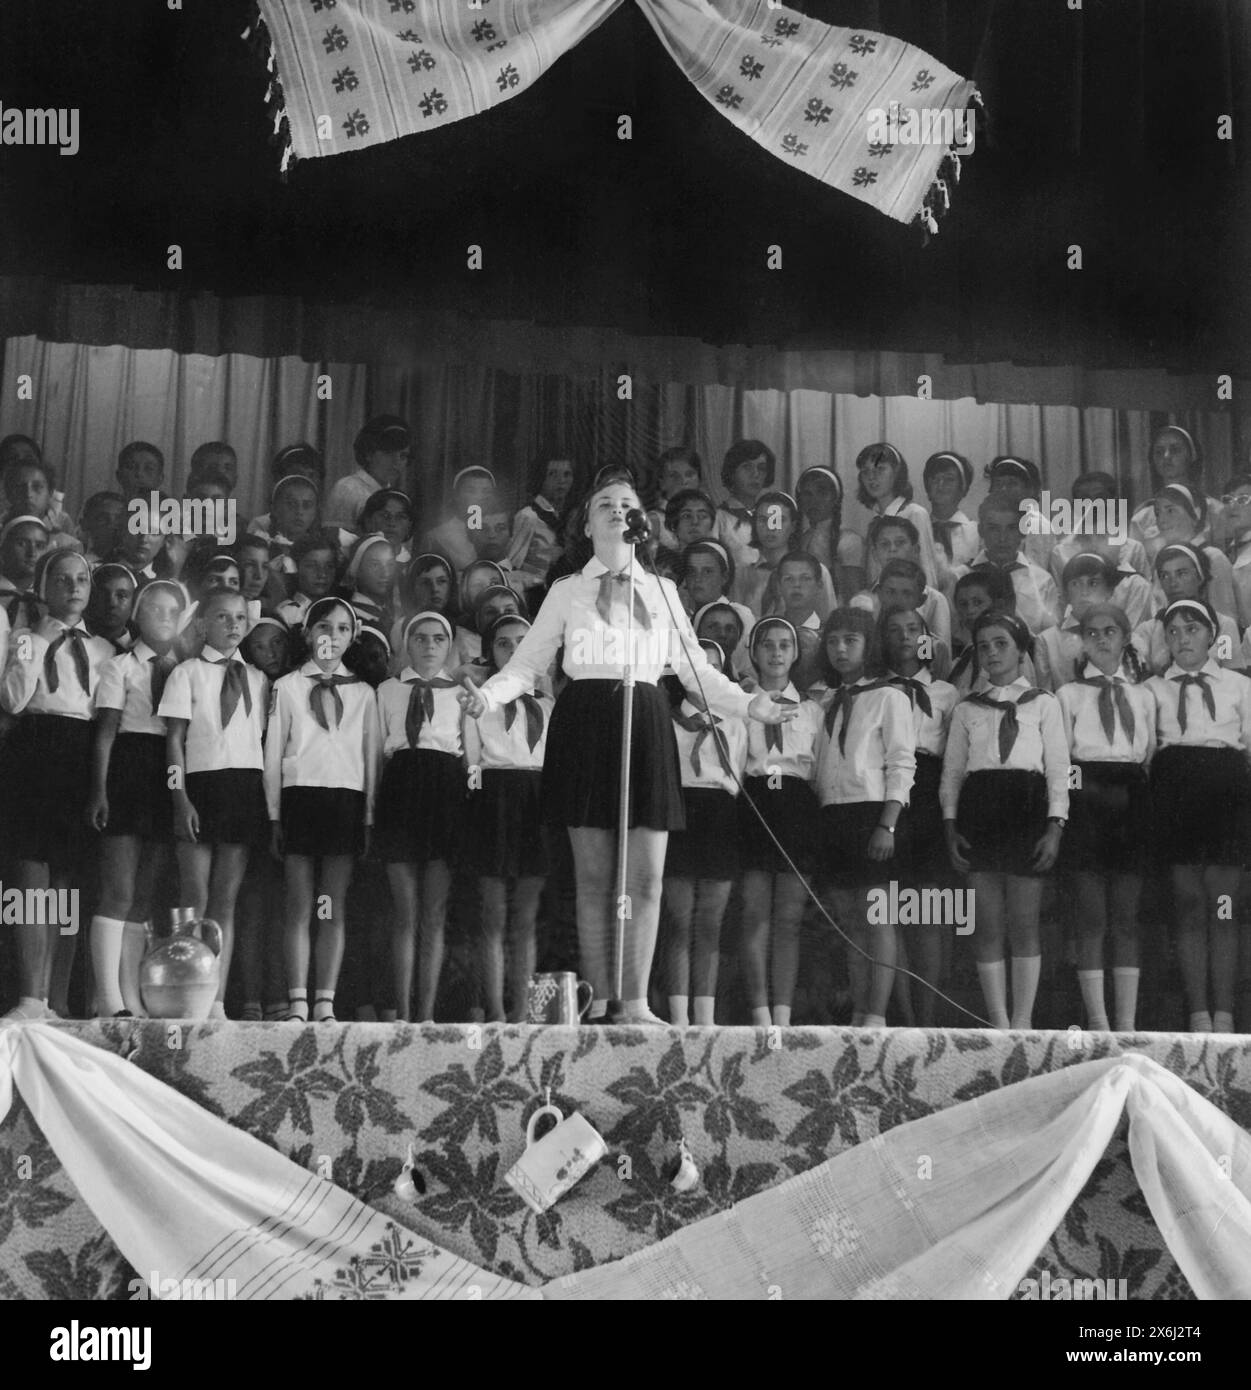 Socialist Republic of Romania in the 1970s. Group of 'Pioneers', students in middle school wearing the standardized uniform. At school celebrations or other events, the pioneers were asked to enthusiastically recite odes dedicated to the regime and to show their gratitude and dedication to the Party and its leaders. Stock Photo